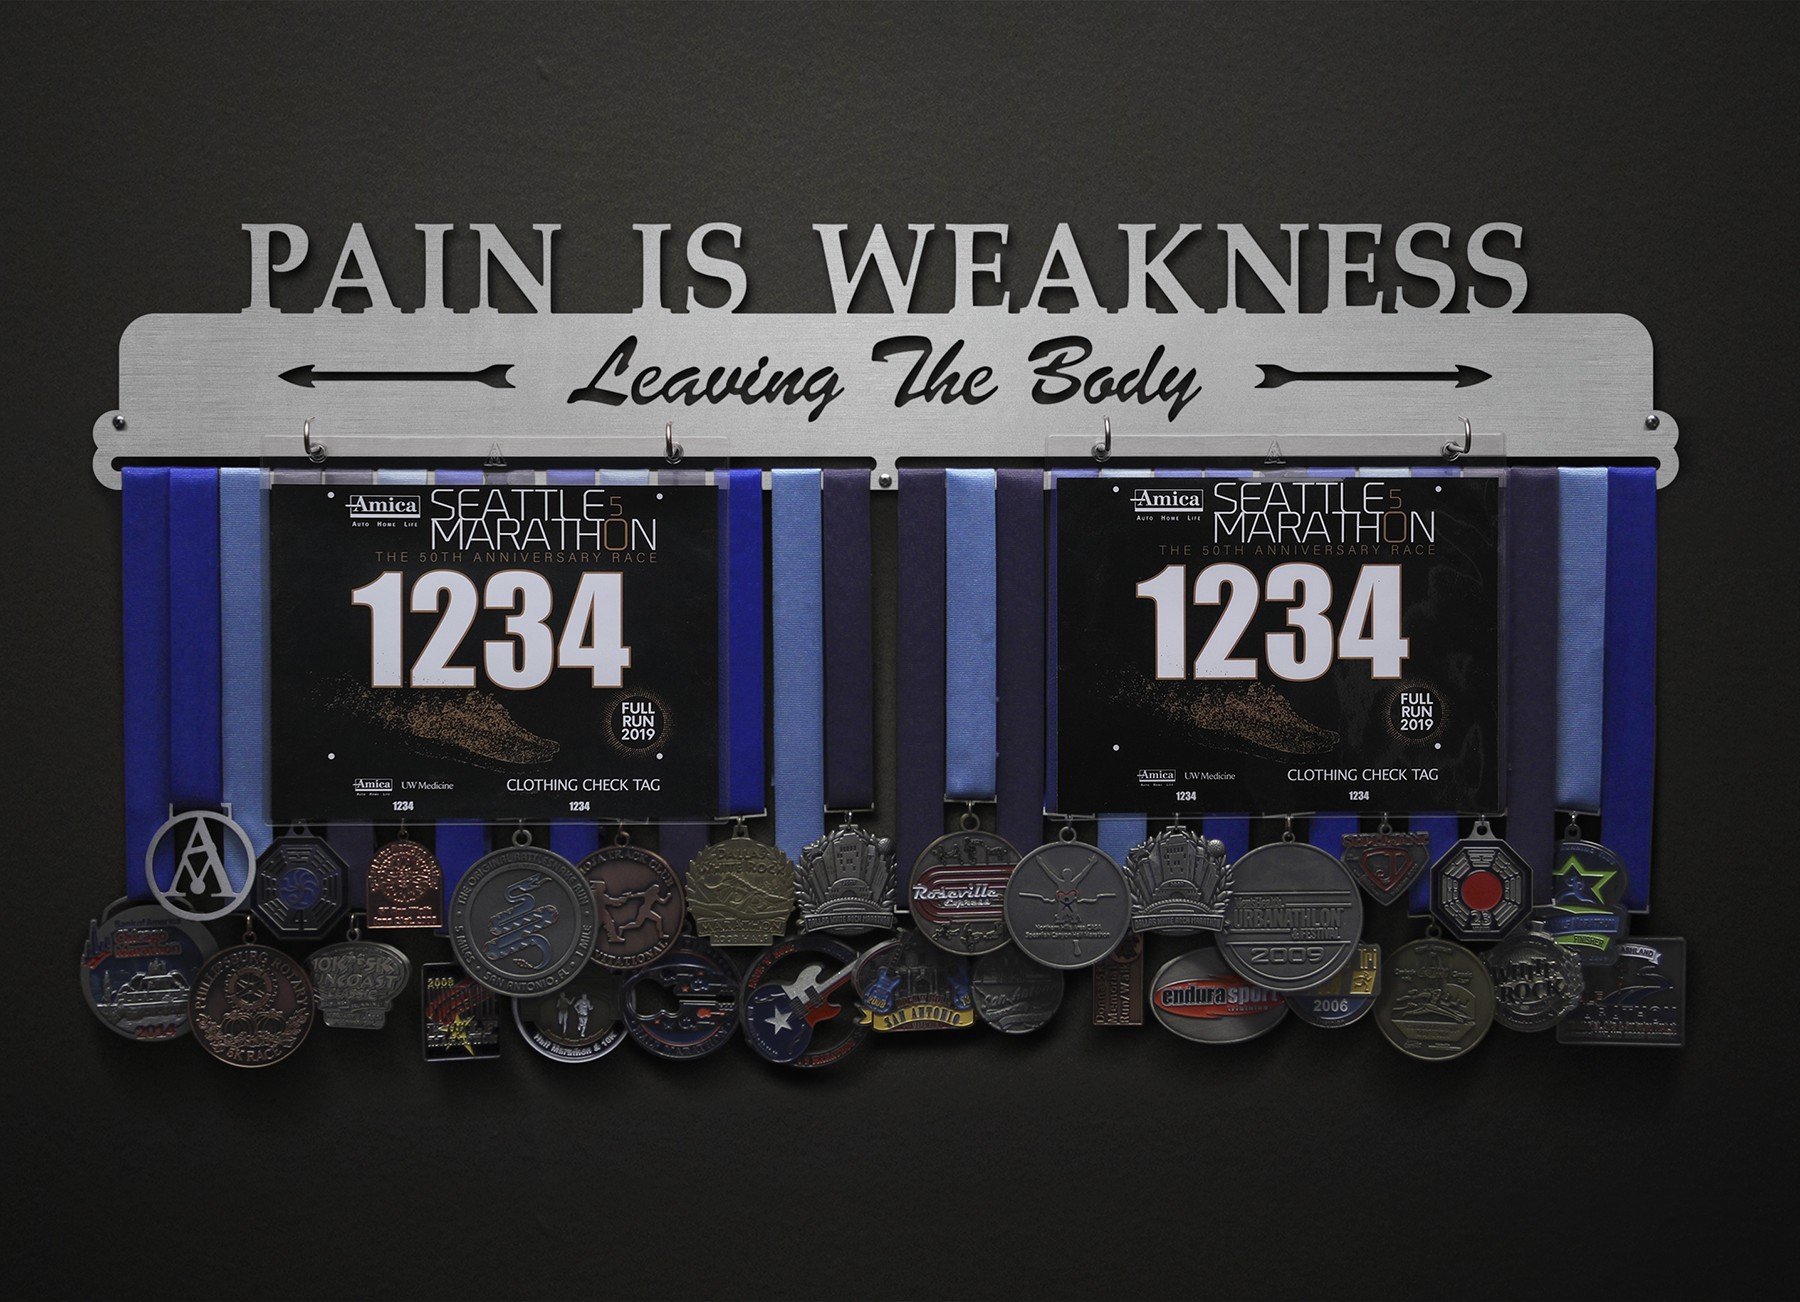 Pain Is Weakness Leaving The Body Bib and Medal Display